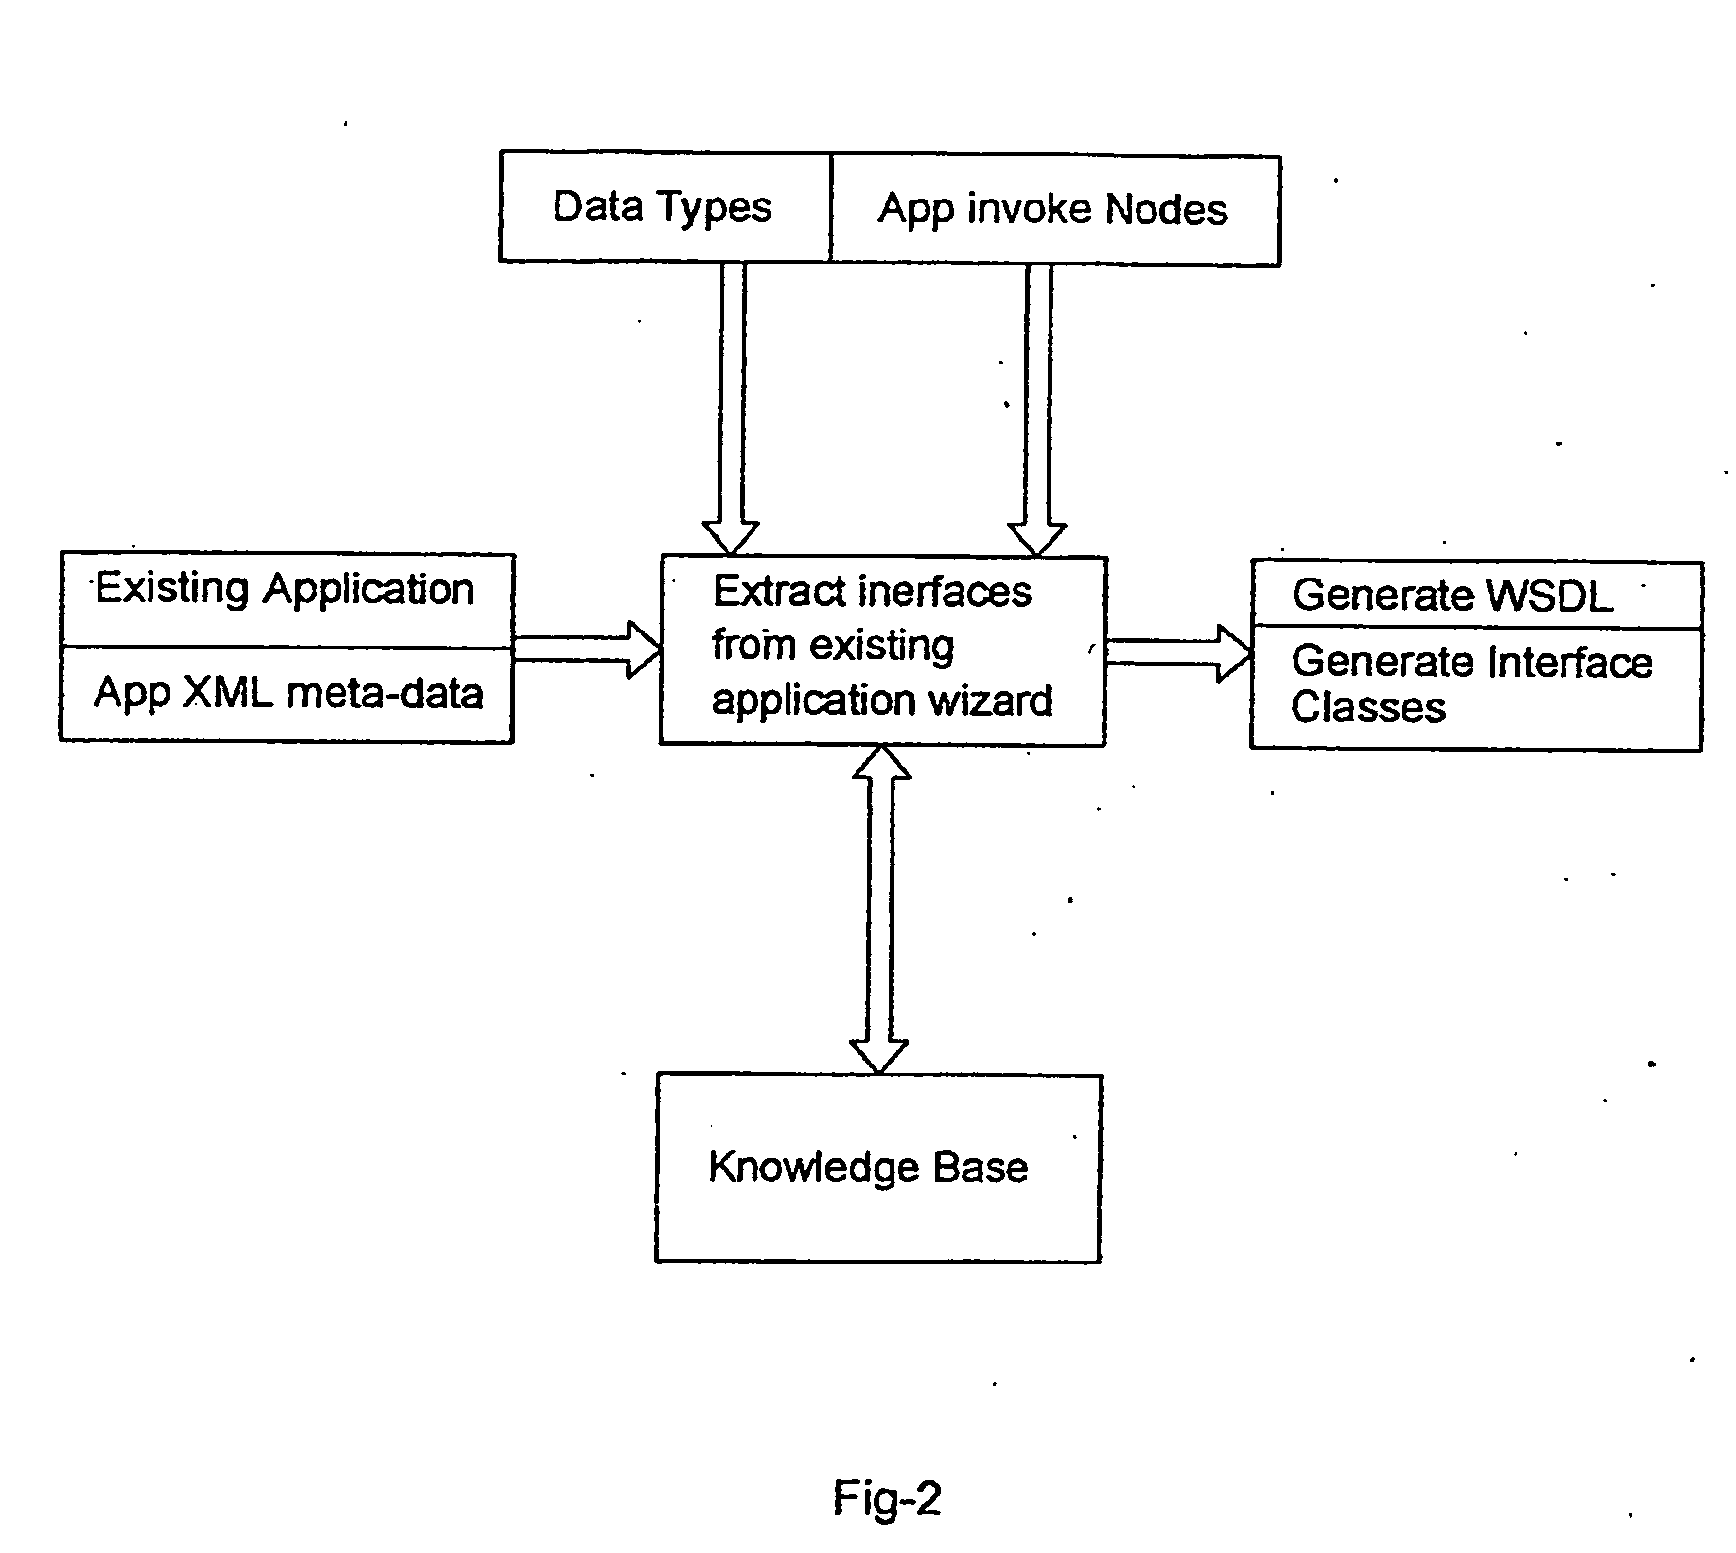 Apparatus for Migration and Conversion of Software Code from Any Source Platform to Any Target Platform